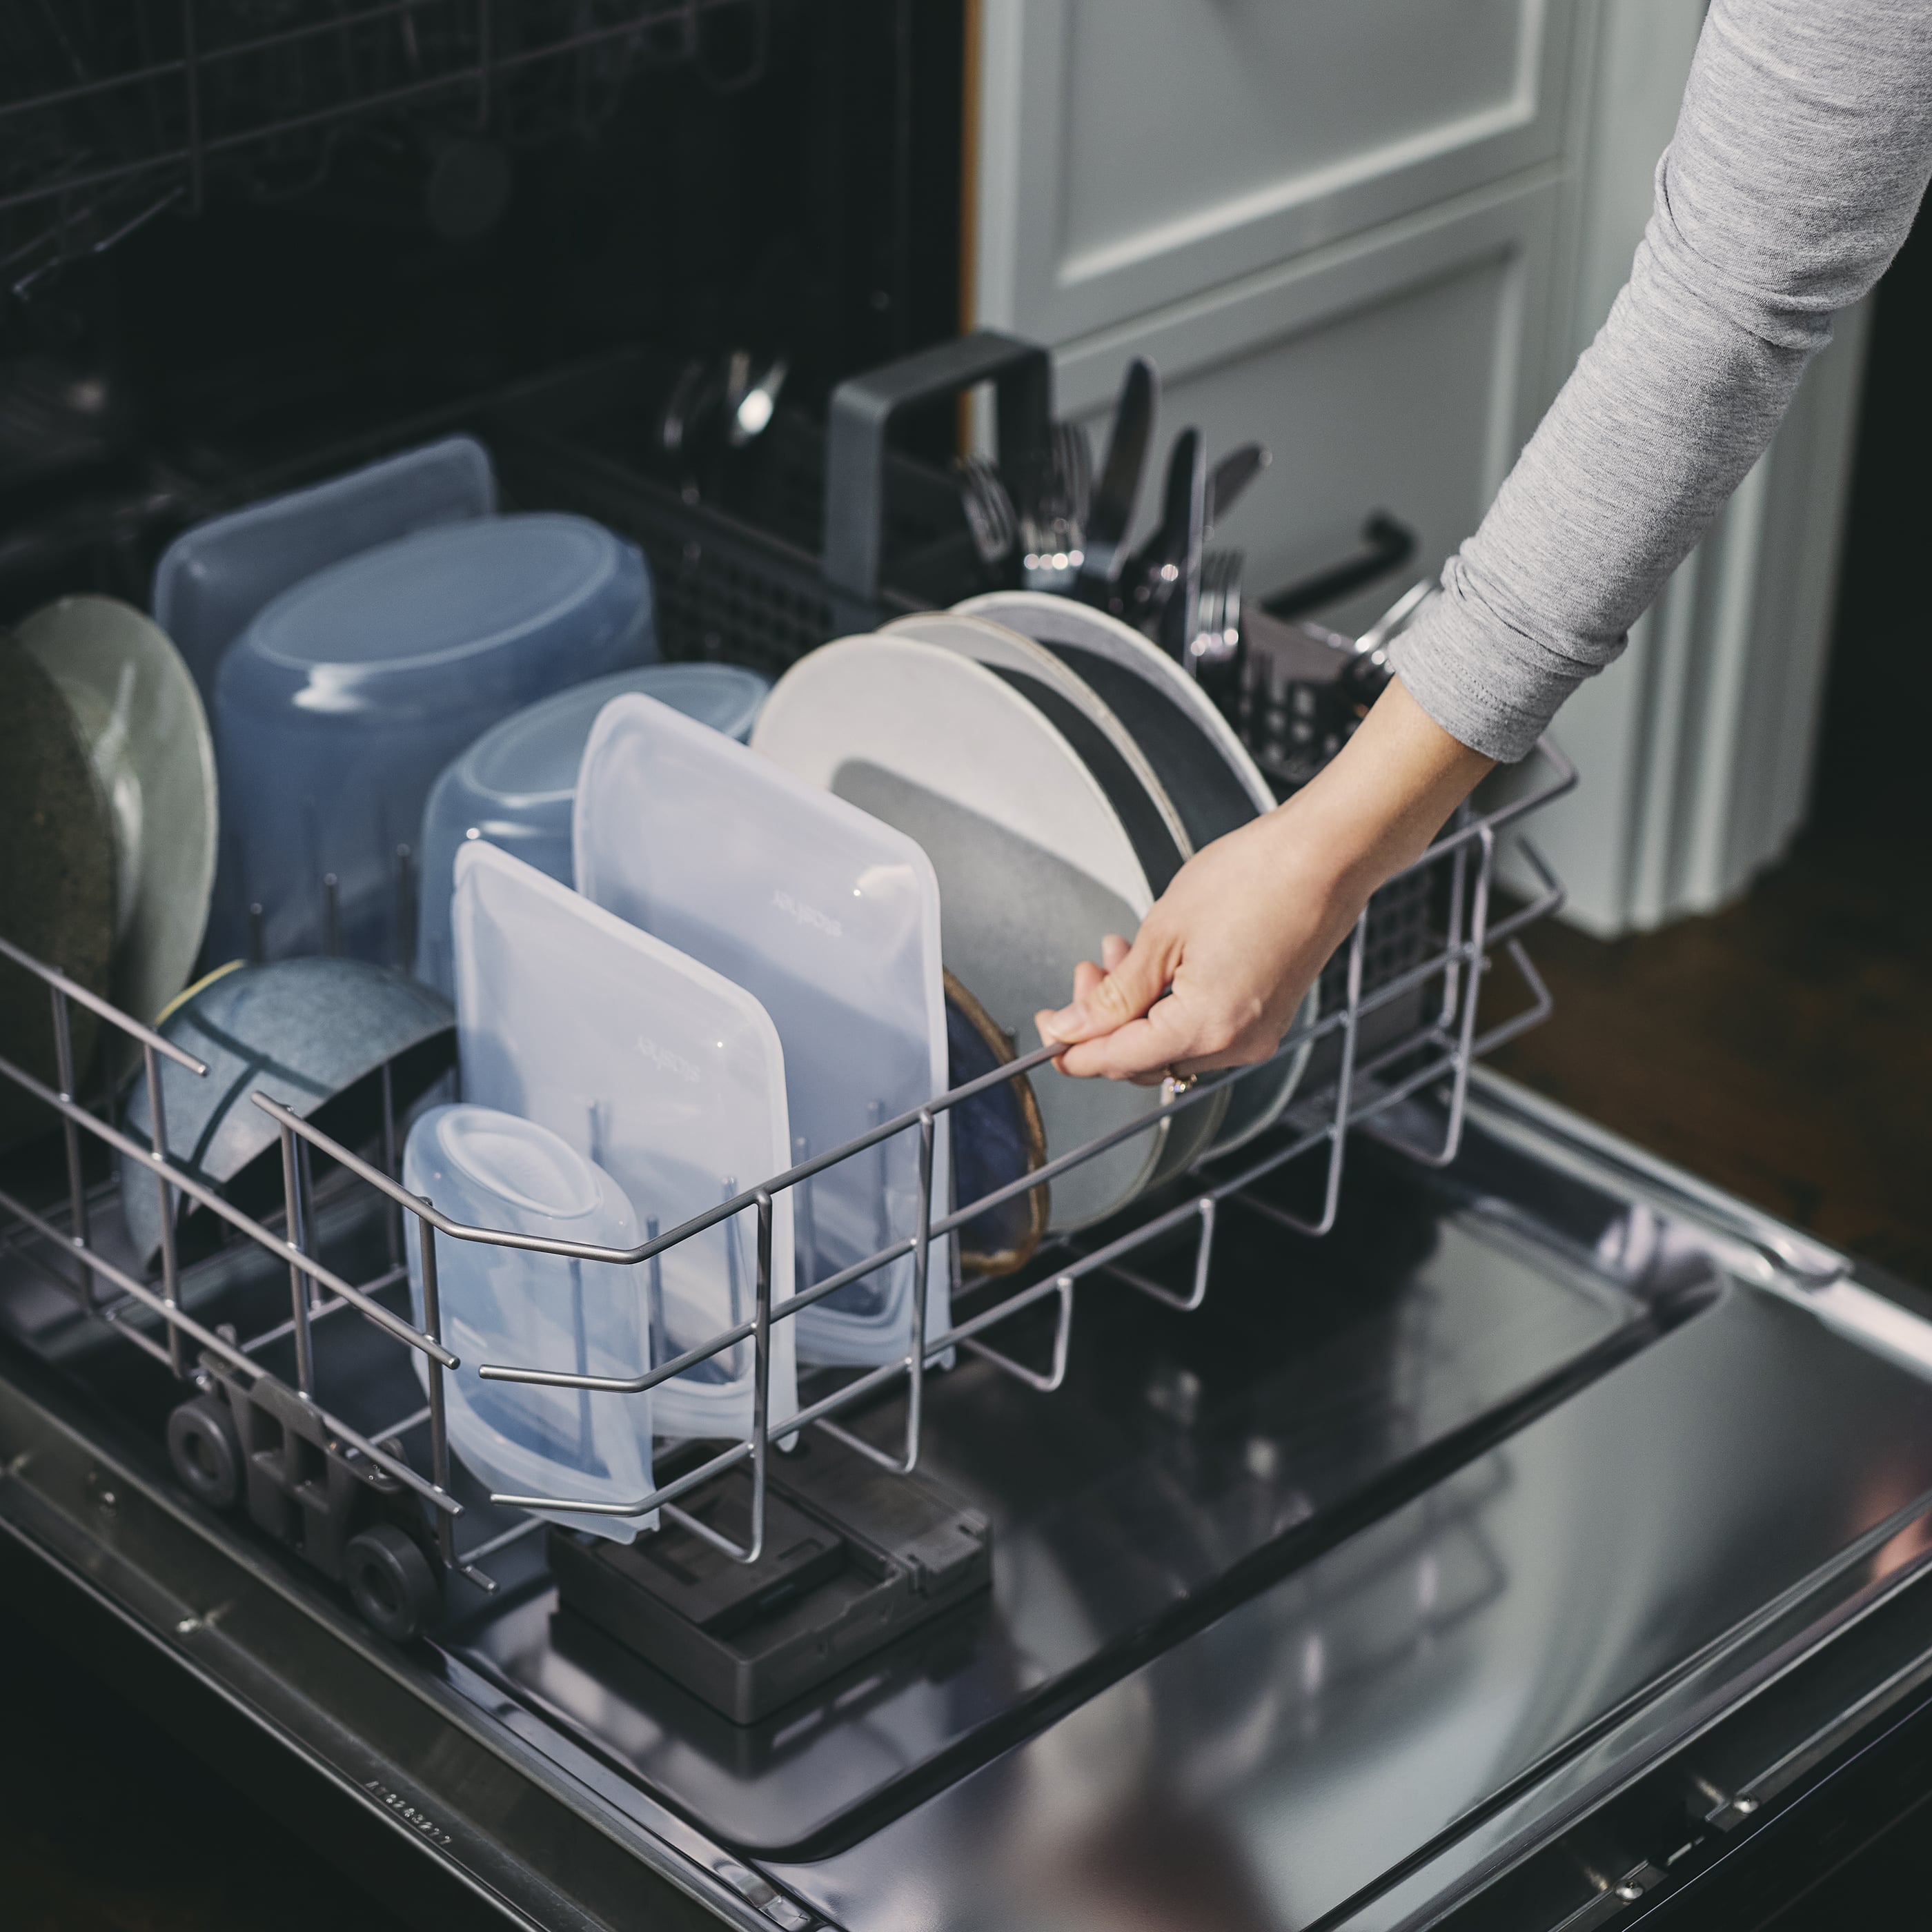 Dishwasher-Safe Reusable Bags: Are Silicone Bags Dishwasher Safe?